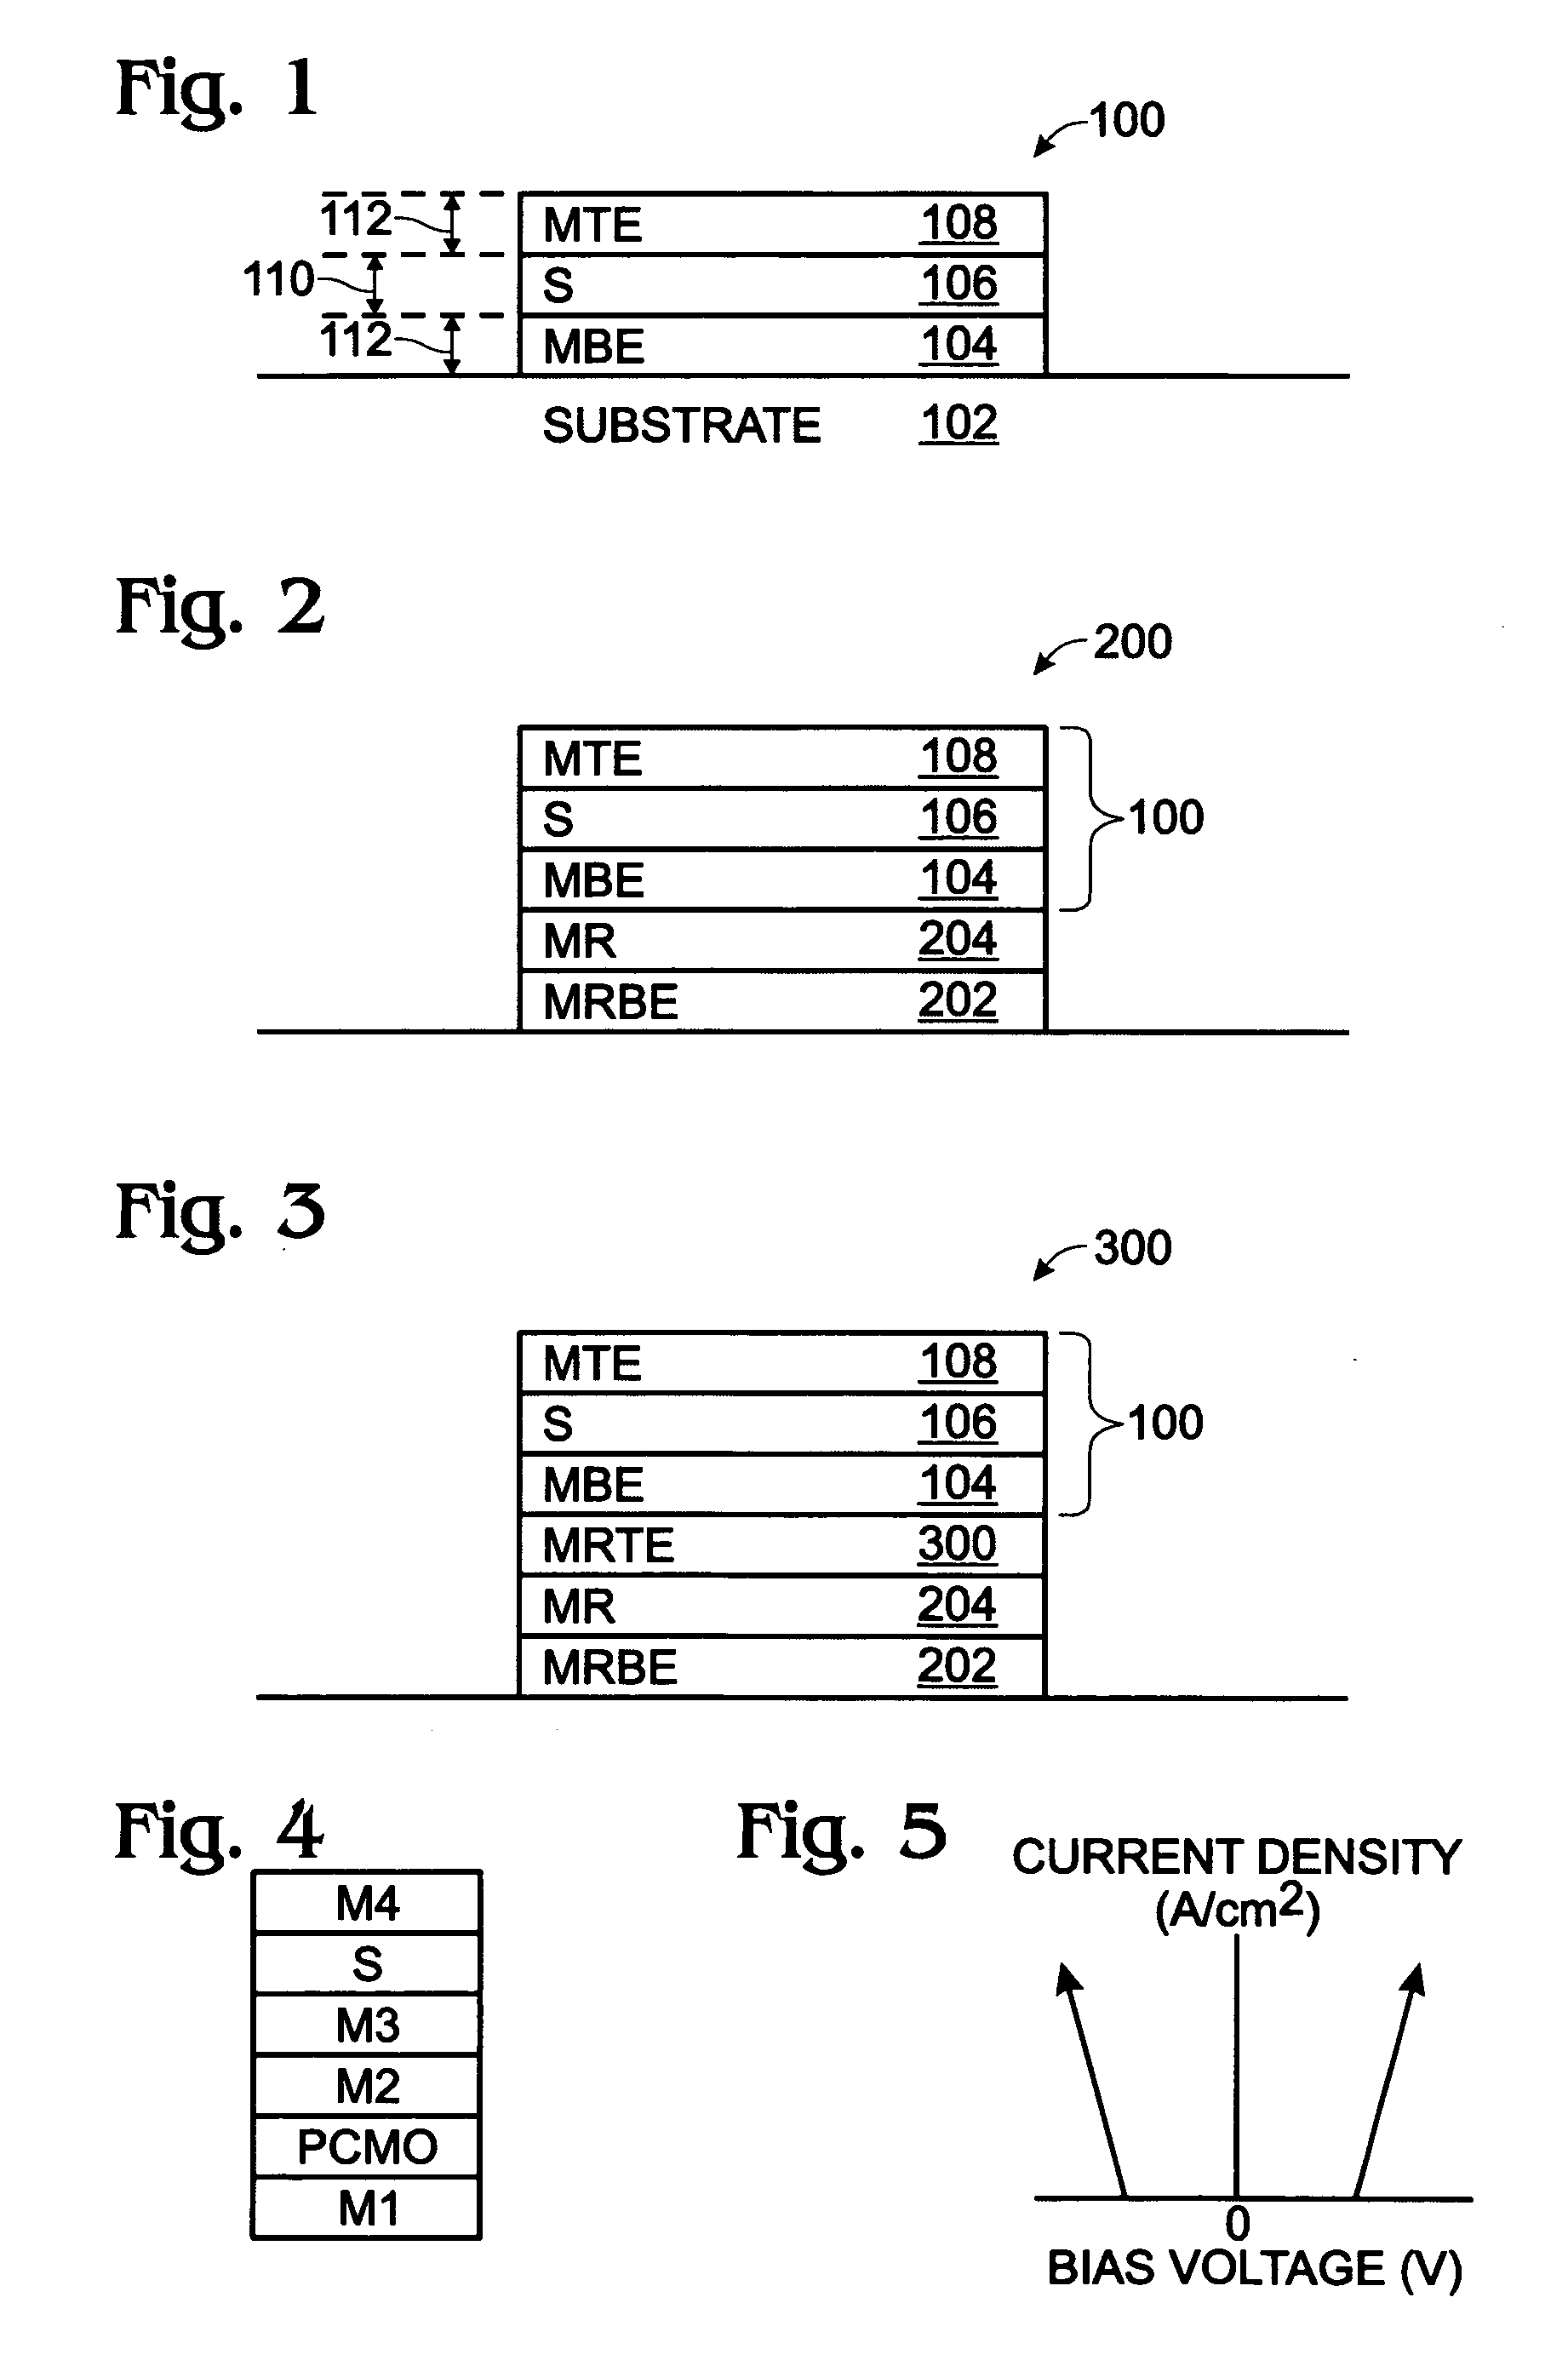 Crosspoint resistor memory device with back-to-back Schottky diodes